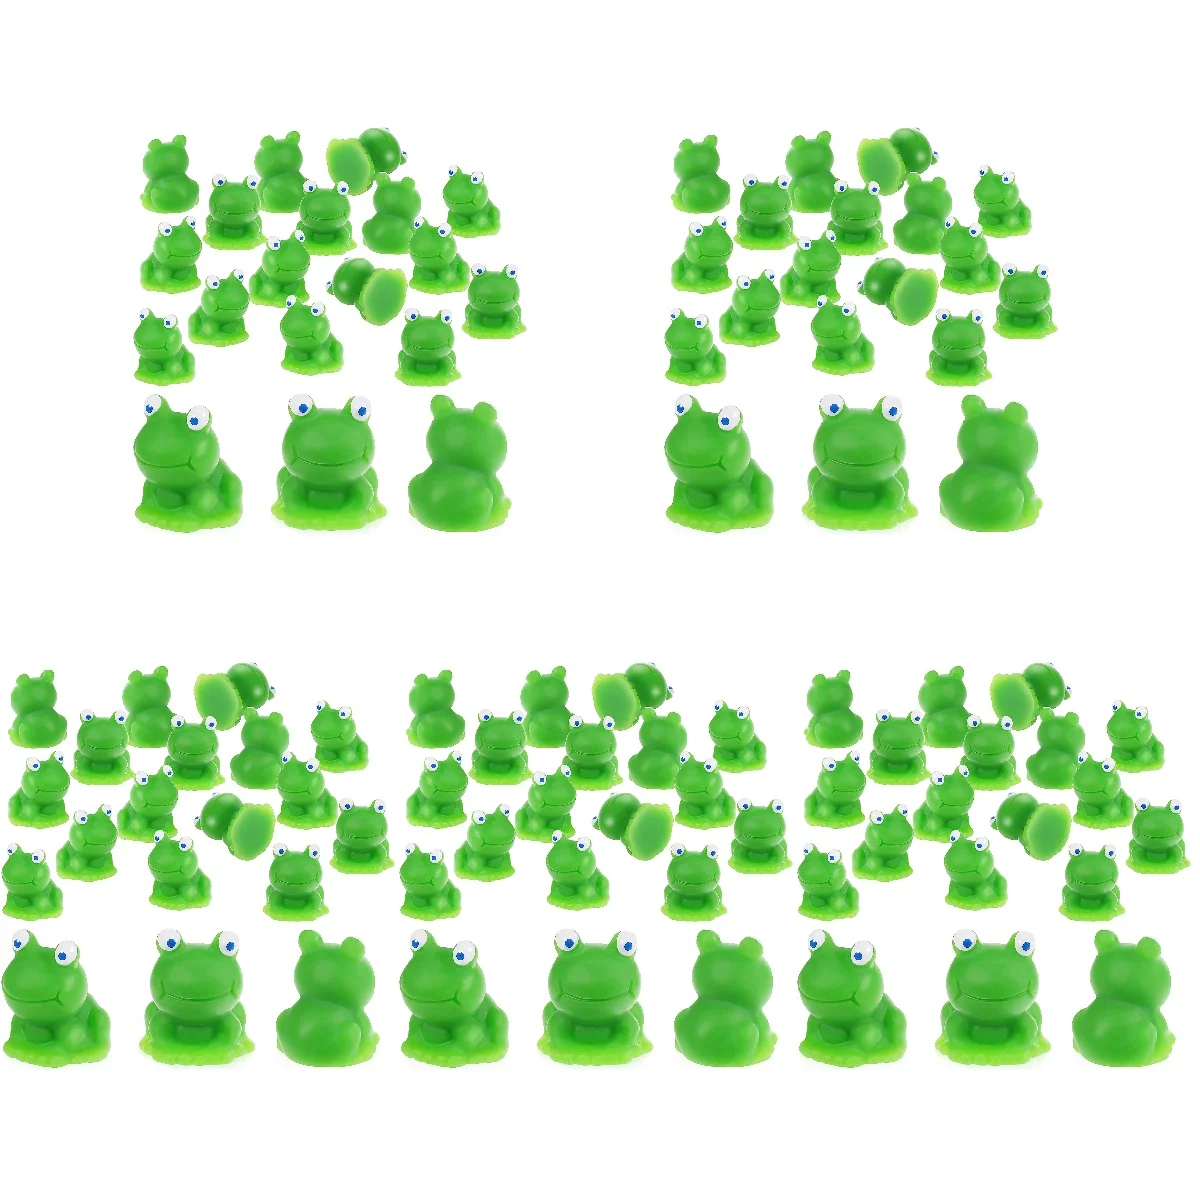 

100 Pcs Resin Frog Figurines Models Small Interesting Funny Realistic Lifelike Frog Props Frog Statues Frog Toys Frog Figurines